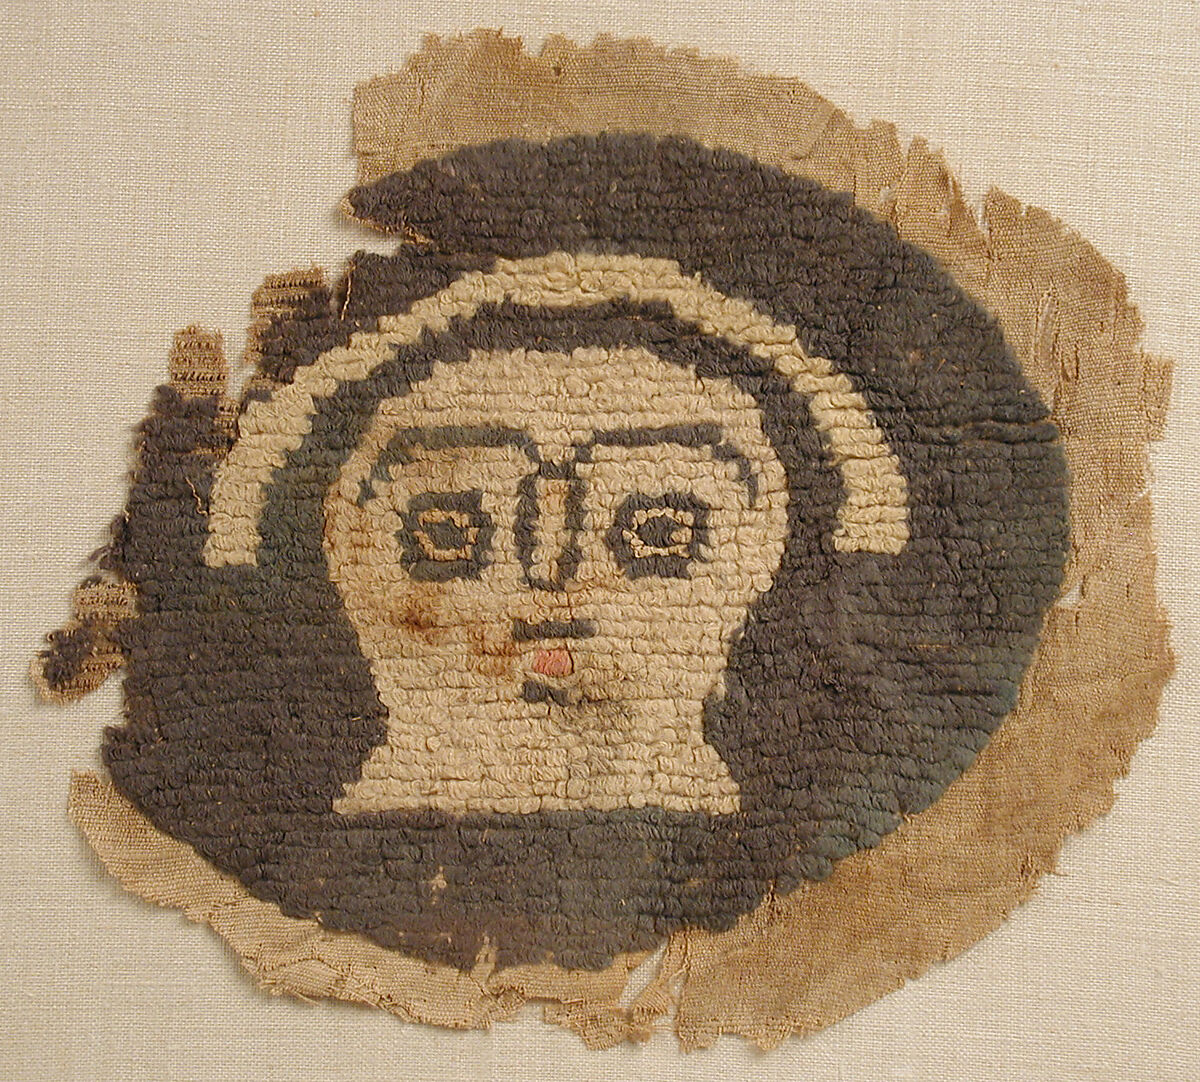 Roundel with Human Face, Linen, Wool (Slip-loop knotted pile), Coptic 